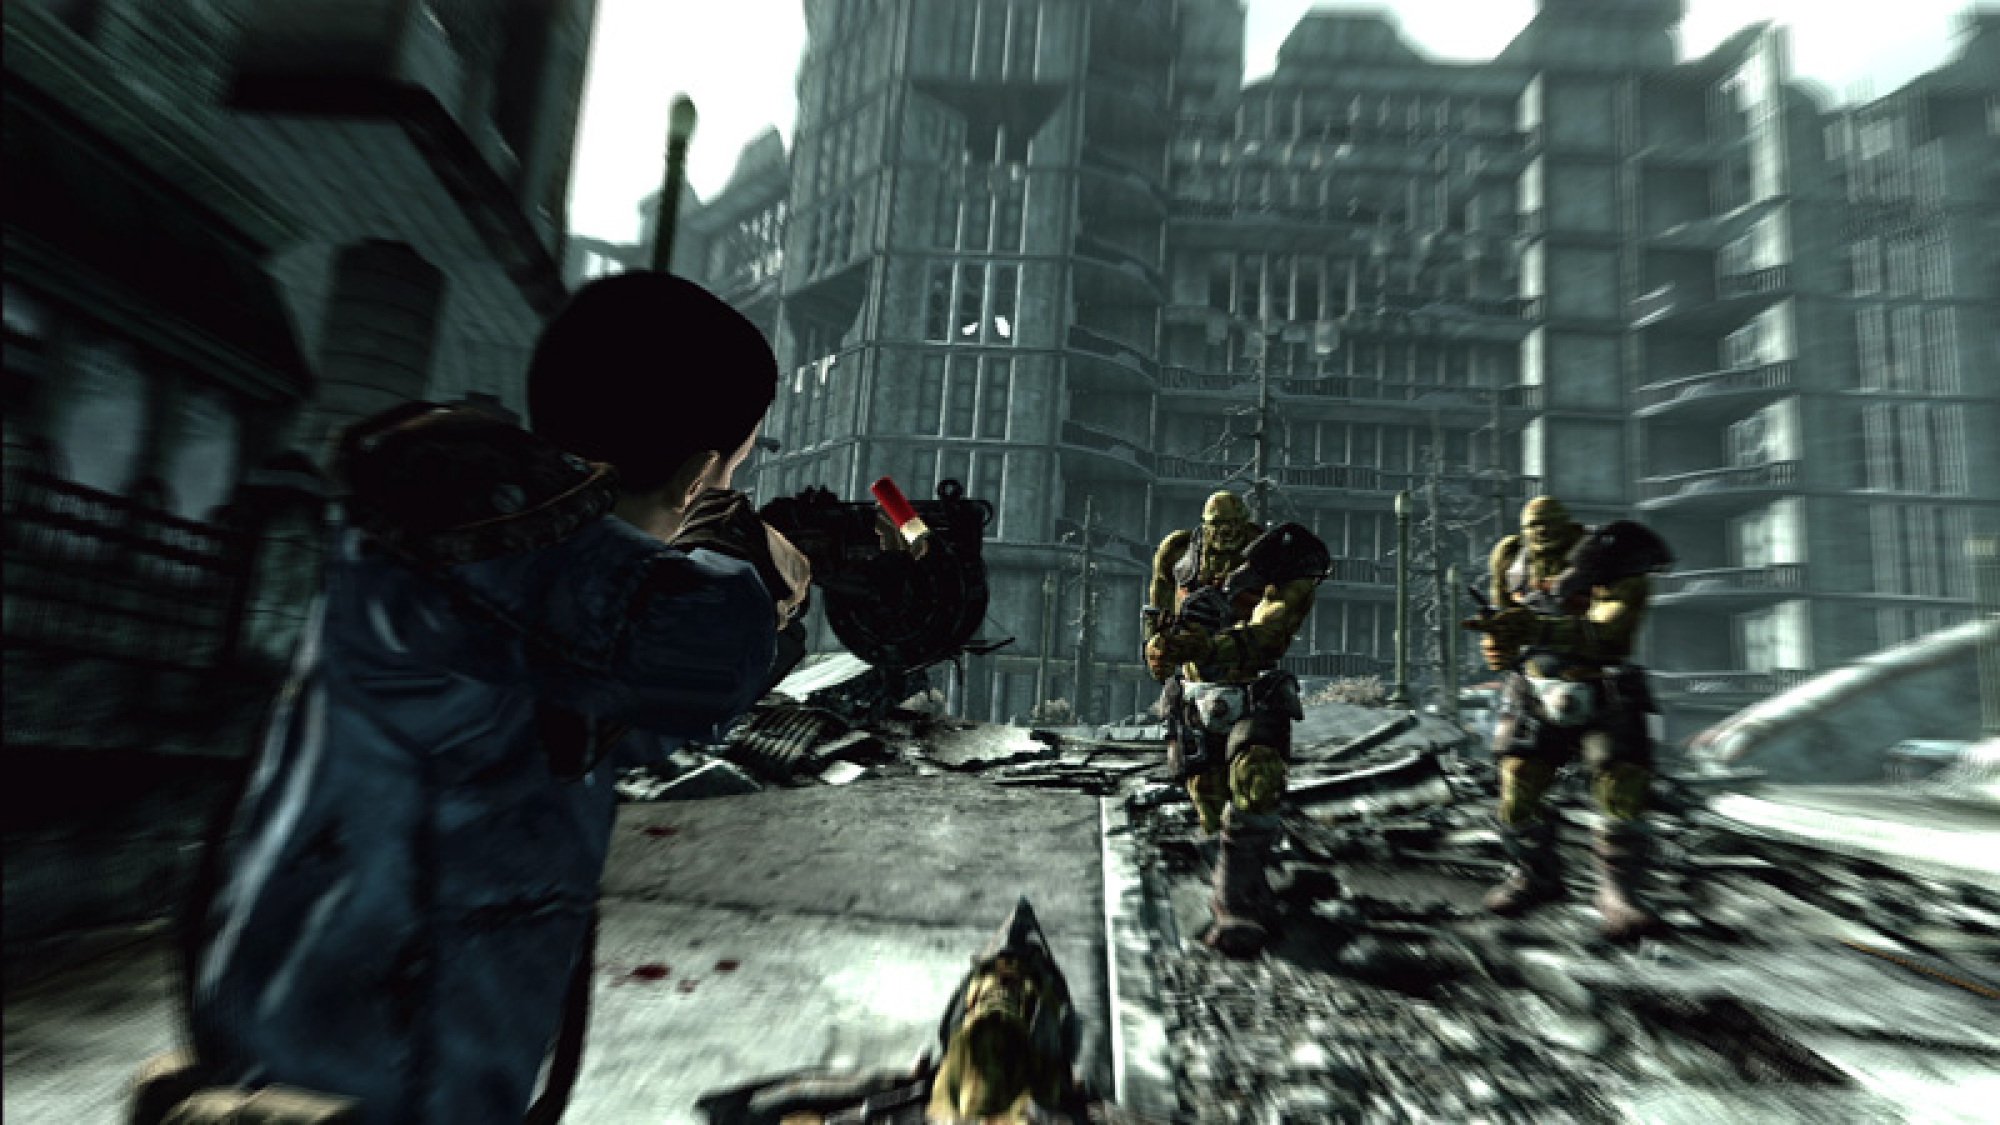 A person in a blue jacket aiming a weapon at armored figures in a desolate urban environment, with rubble and a dead creature on the ground.